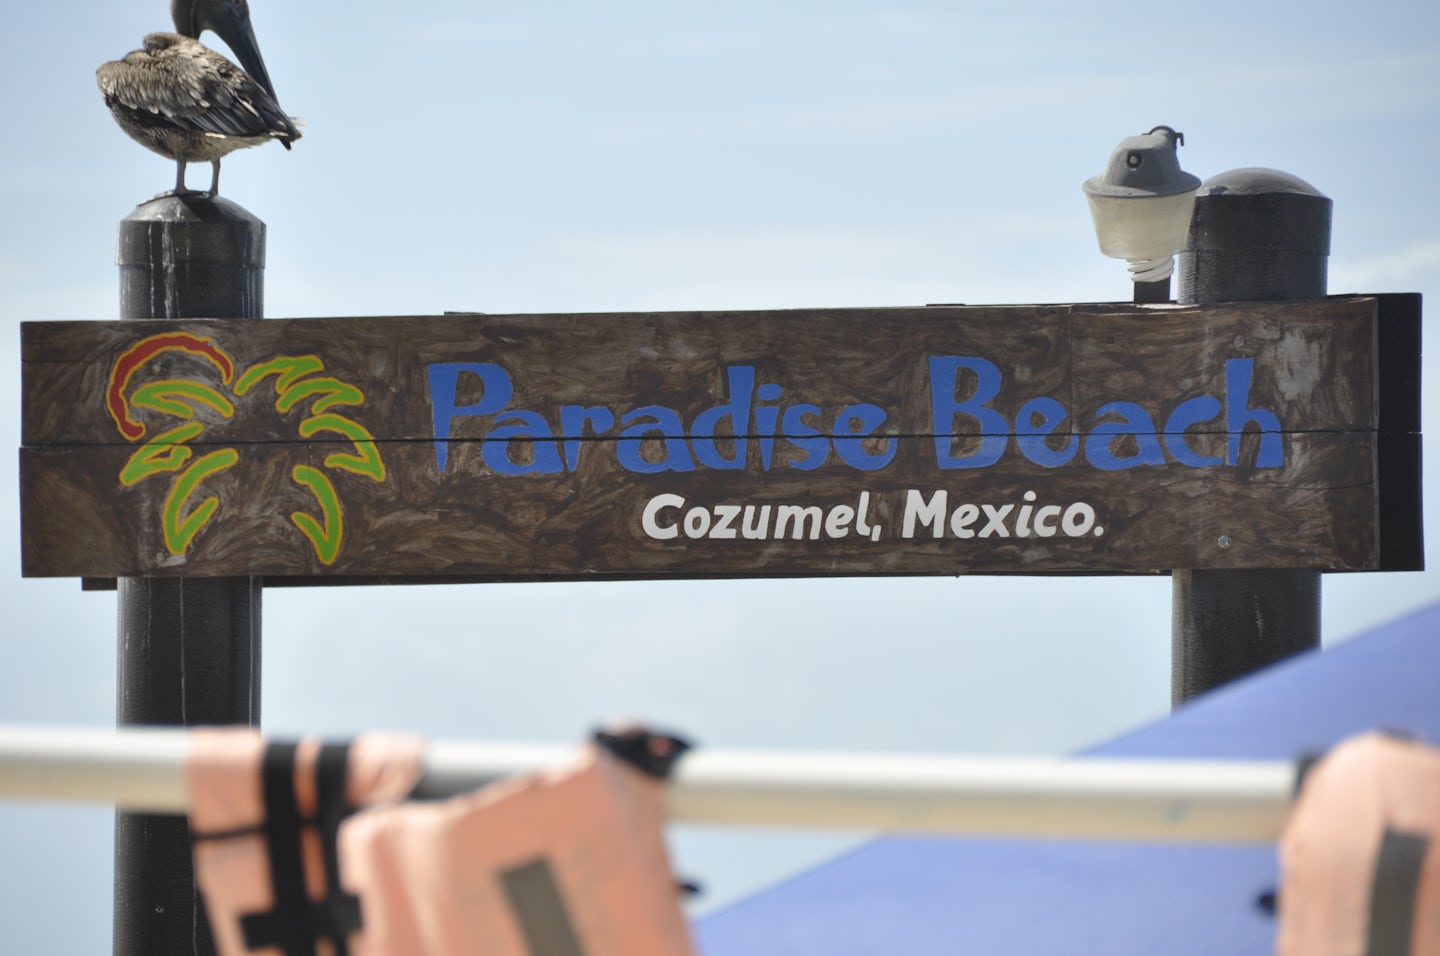 In Cozumel, we did our own excursion to Paradise Beach Resort.  They have a pool and beach front that you can use for a $3 cost.  This cost gets you a beach chair as well.  You must spend a minimum of $10 on food and drinks while you are there